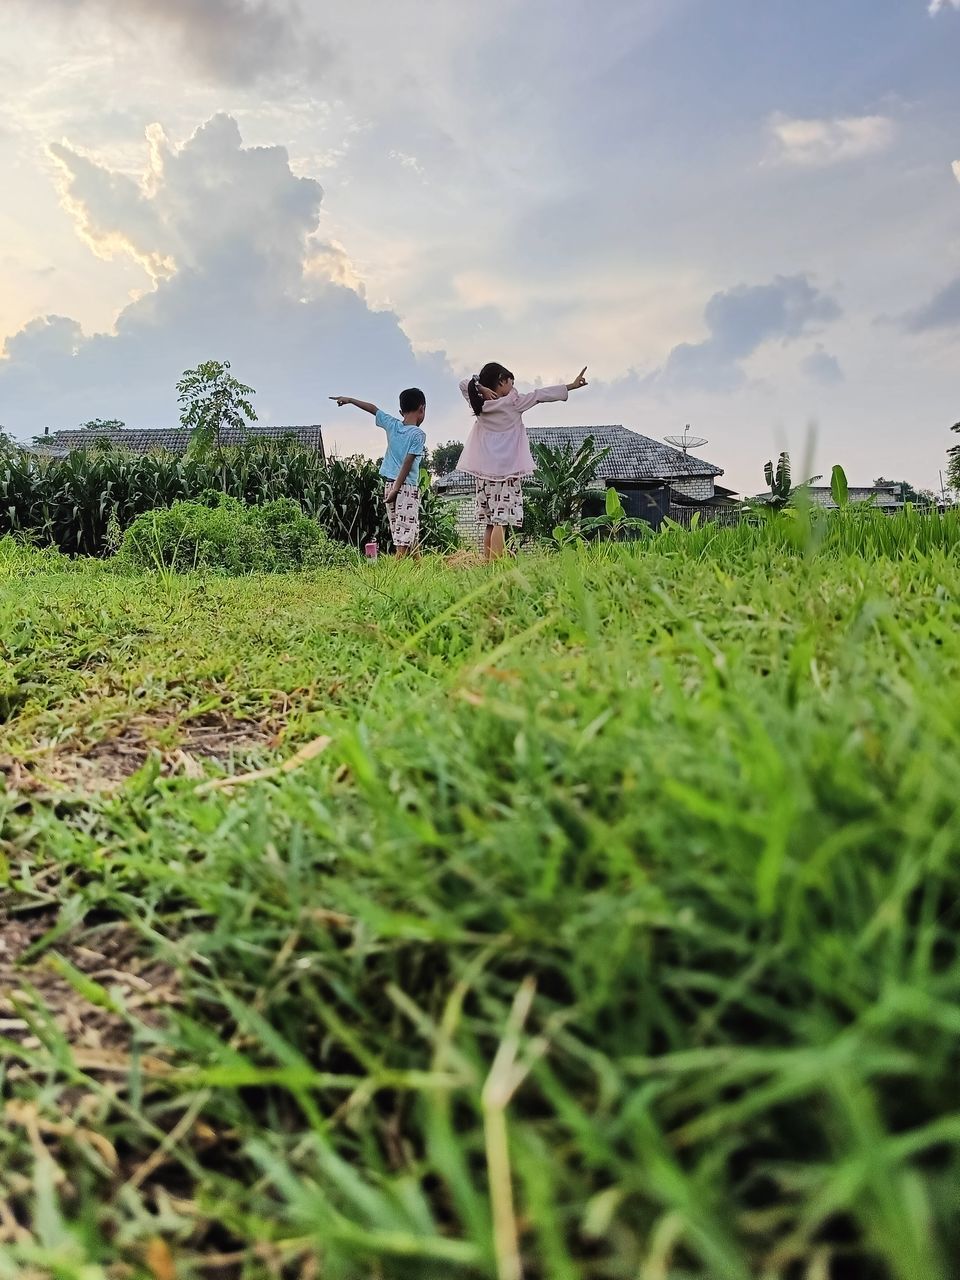 agriculture, field, grass, plant, rural area, sky, crop, landscape, rural scene, land, green, nature, meadow, flower, environment, paddy field, cloud, adult, occupation, farm, food, food and drink, growth, farmer, men, working, plantation, outdoors, two people, harvesting, vegetable, beauty in nature, child, women, day, grassland, childhood, cereal plant, lawn